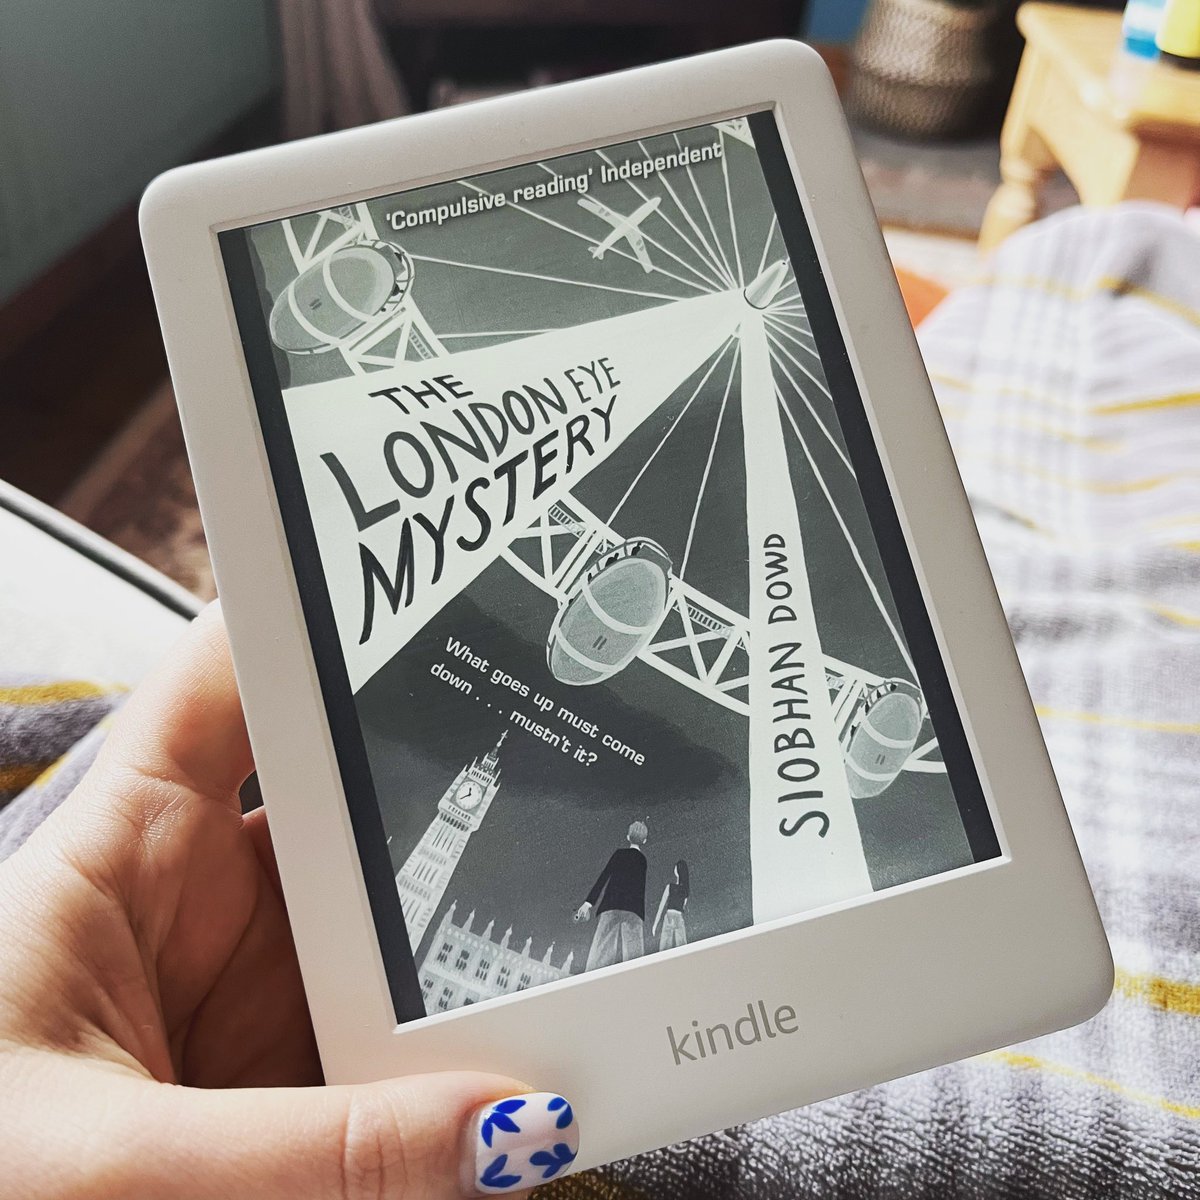 2022 Reading Challenge: 7/52 📚 

The London Eye Mystery ⭐️⭐️⭐️.5
Great little easy read. Really enjoyed it! #2022readingchallenge #kindlereading #thelondoneyemystery #halftermreading ✨📚